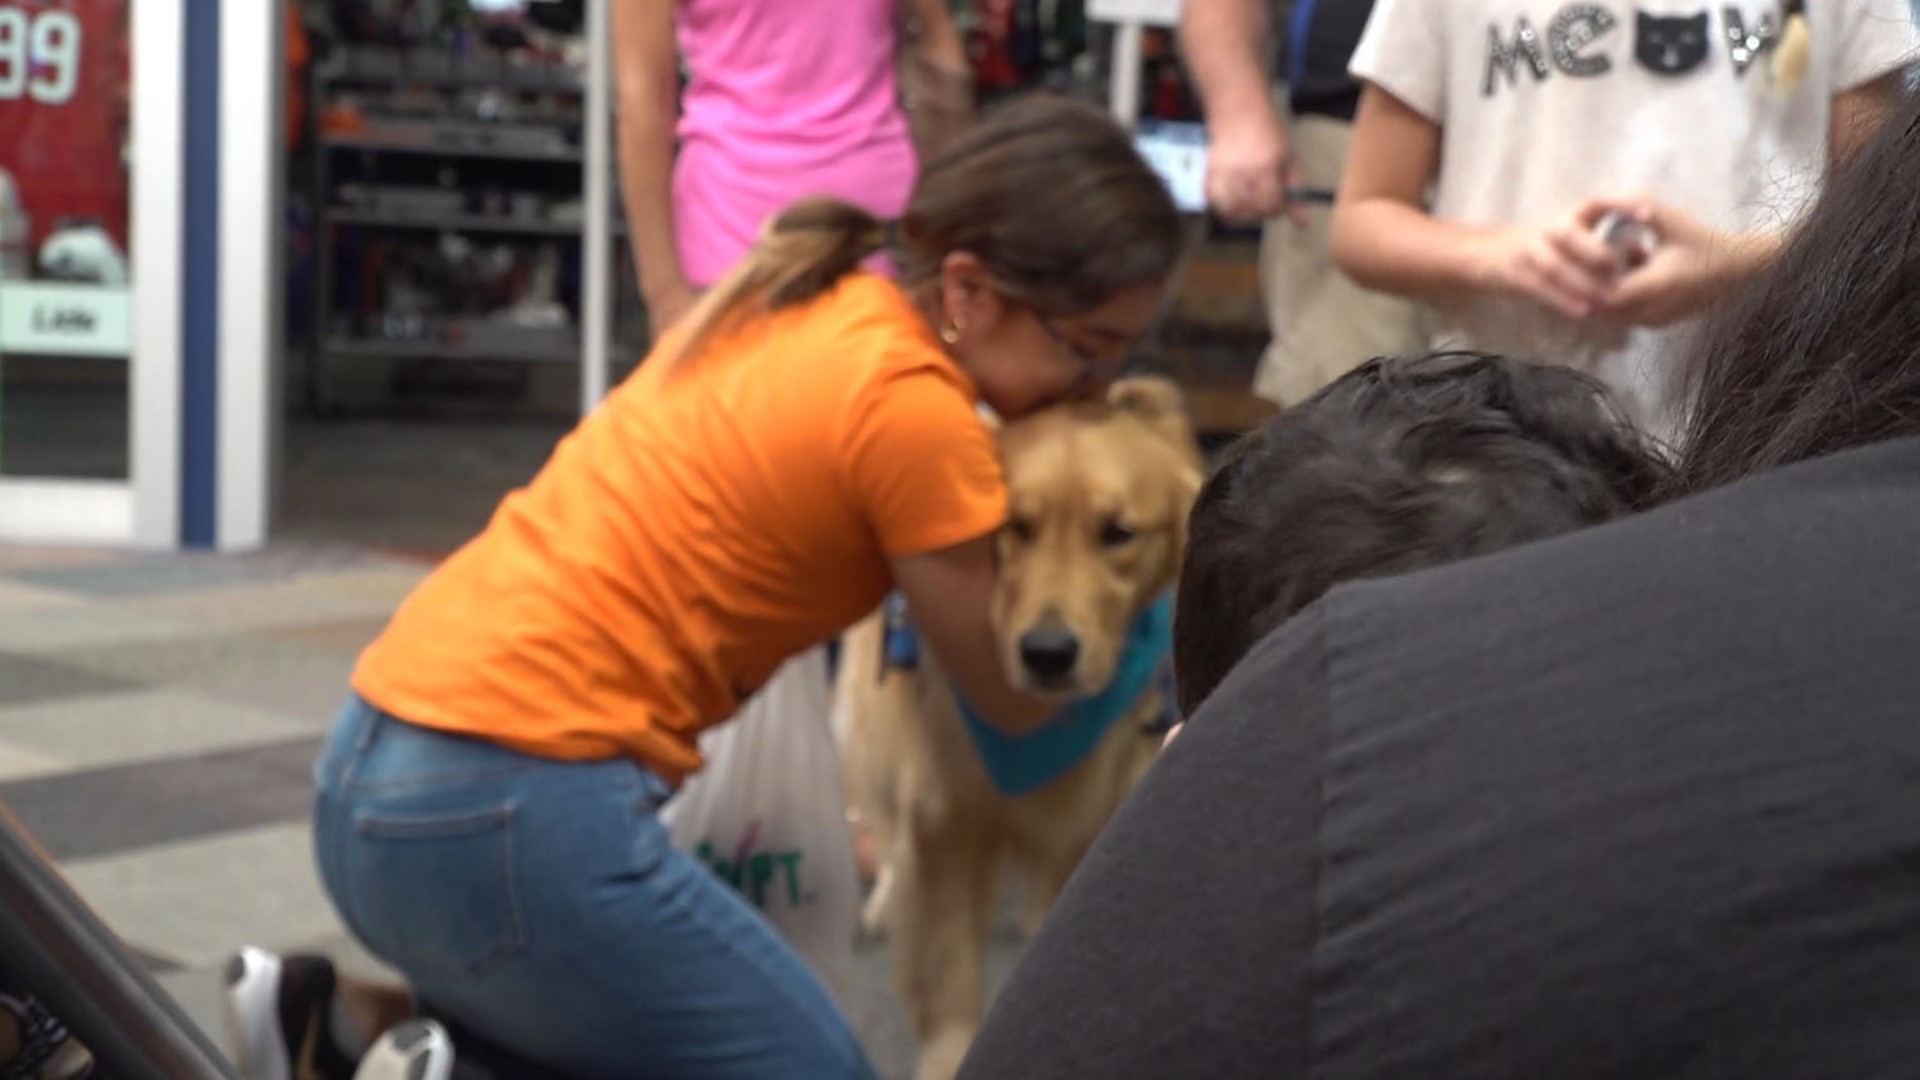 Comfort dogs arrive in Midland-Odessa to help the community heal after a mass shooting. On Saturday, a gunman killed 7 people and wounded at least 21 others in a shooting spree that spanned the two West Texas cities.